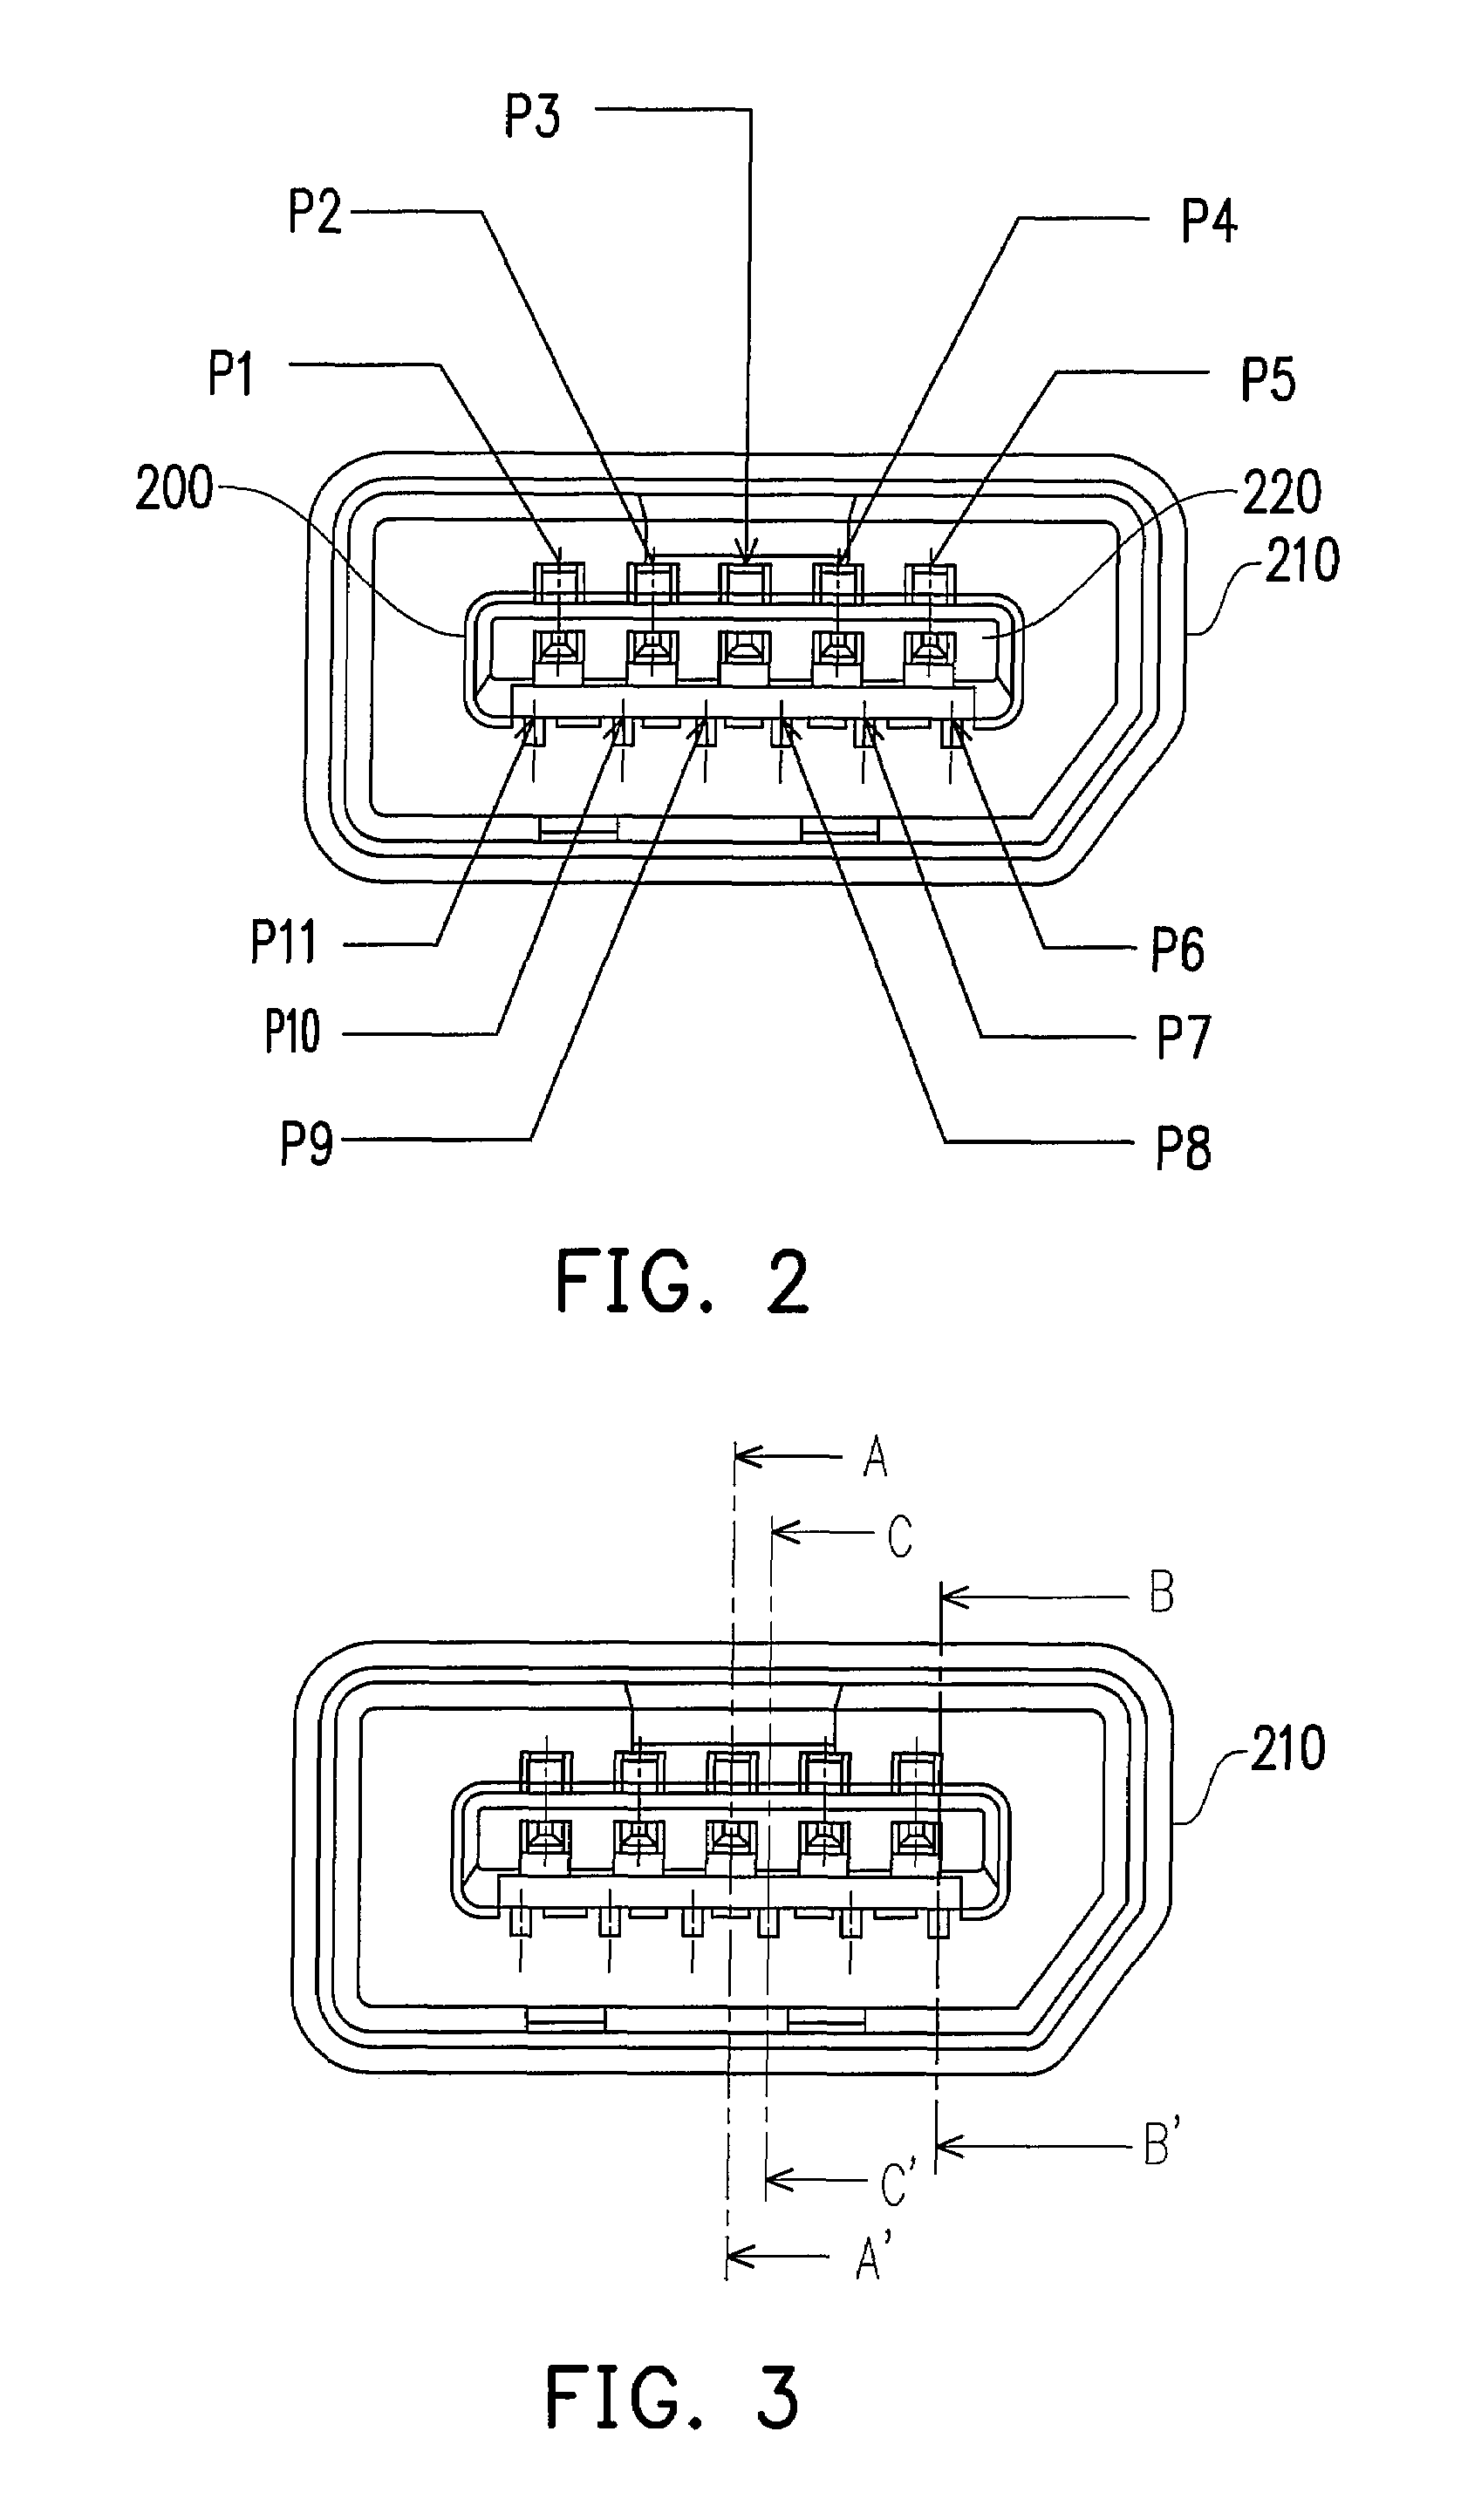 Connector having pin groups with different pin lengths